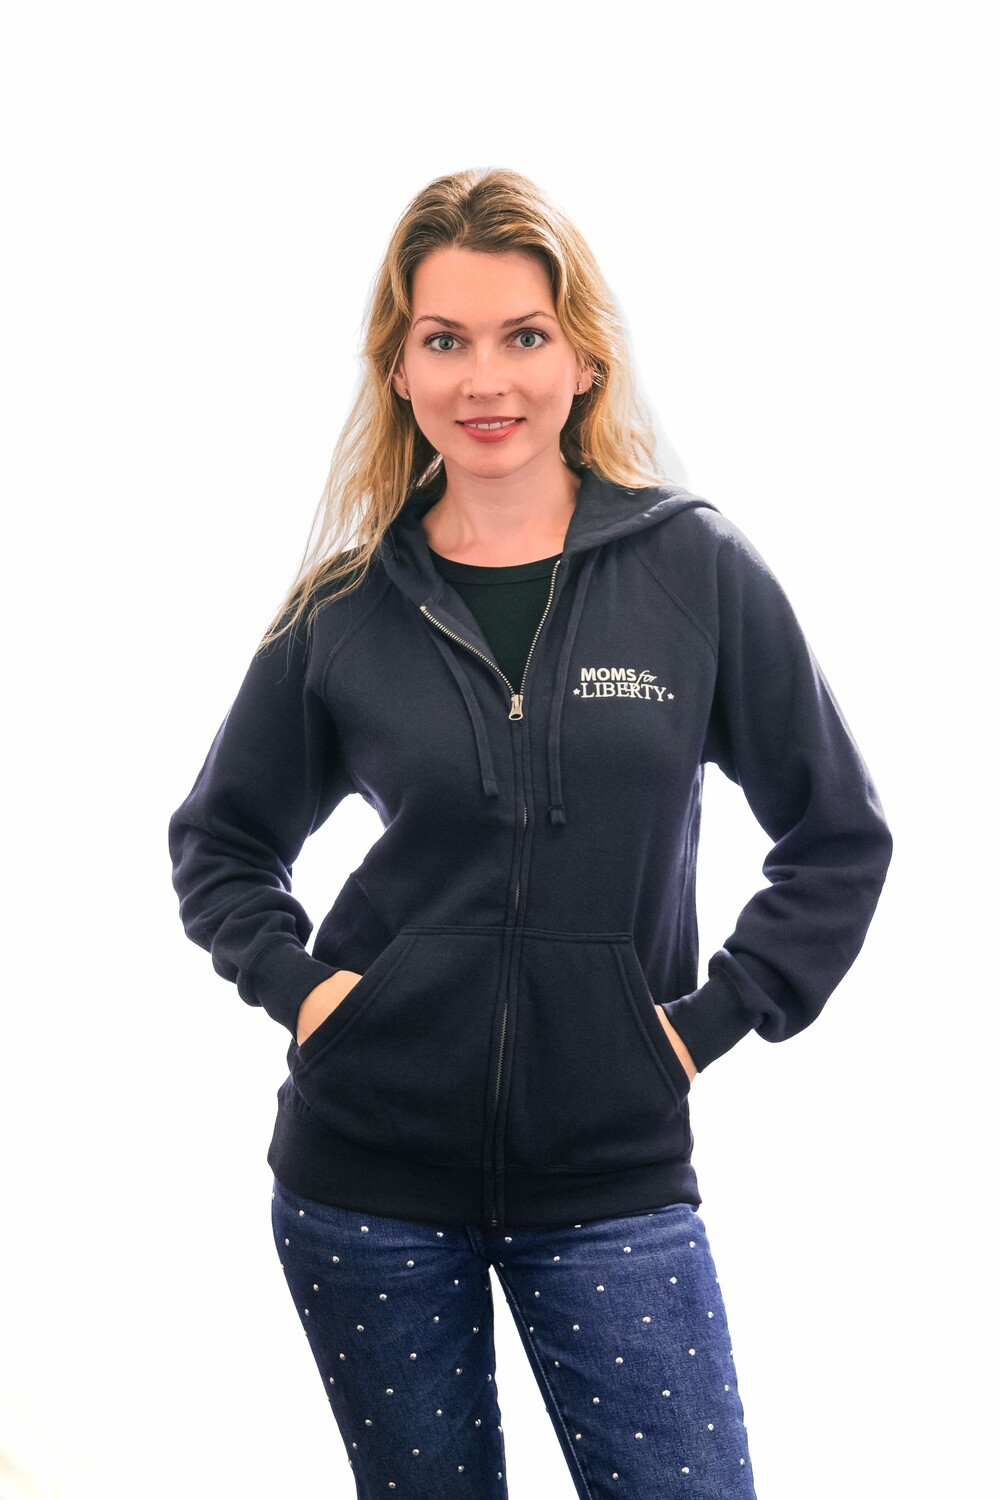 Moms for Liberty Embroidered Zip Up Hoodie